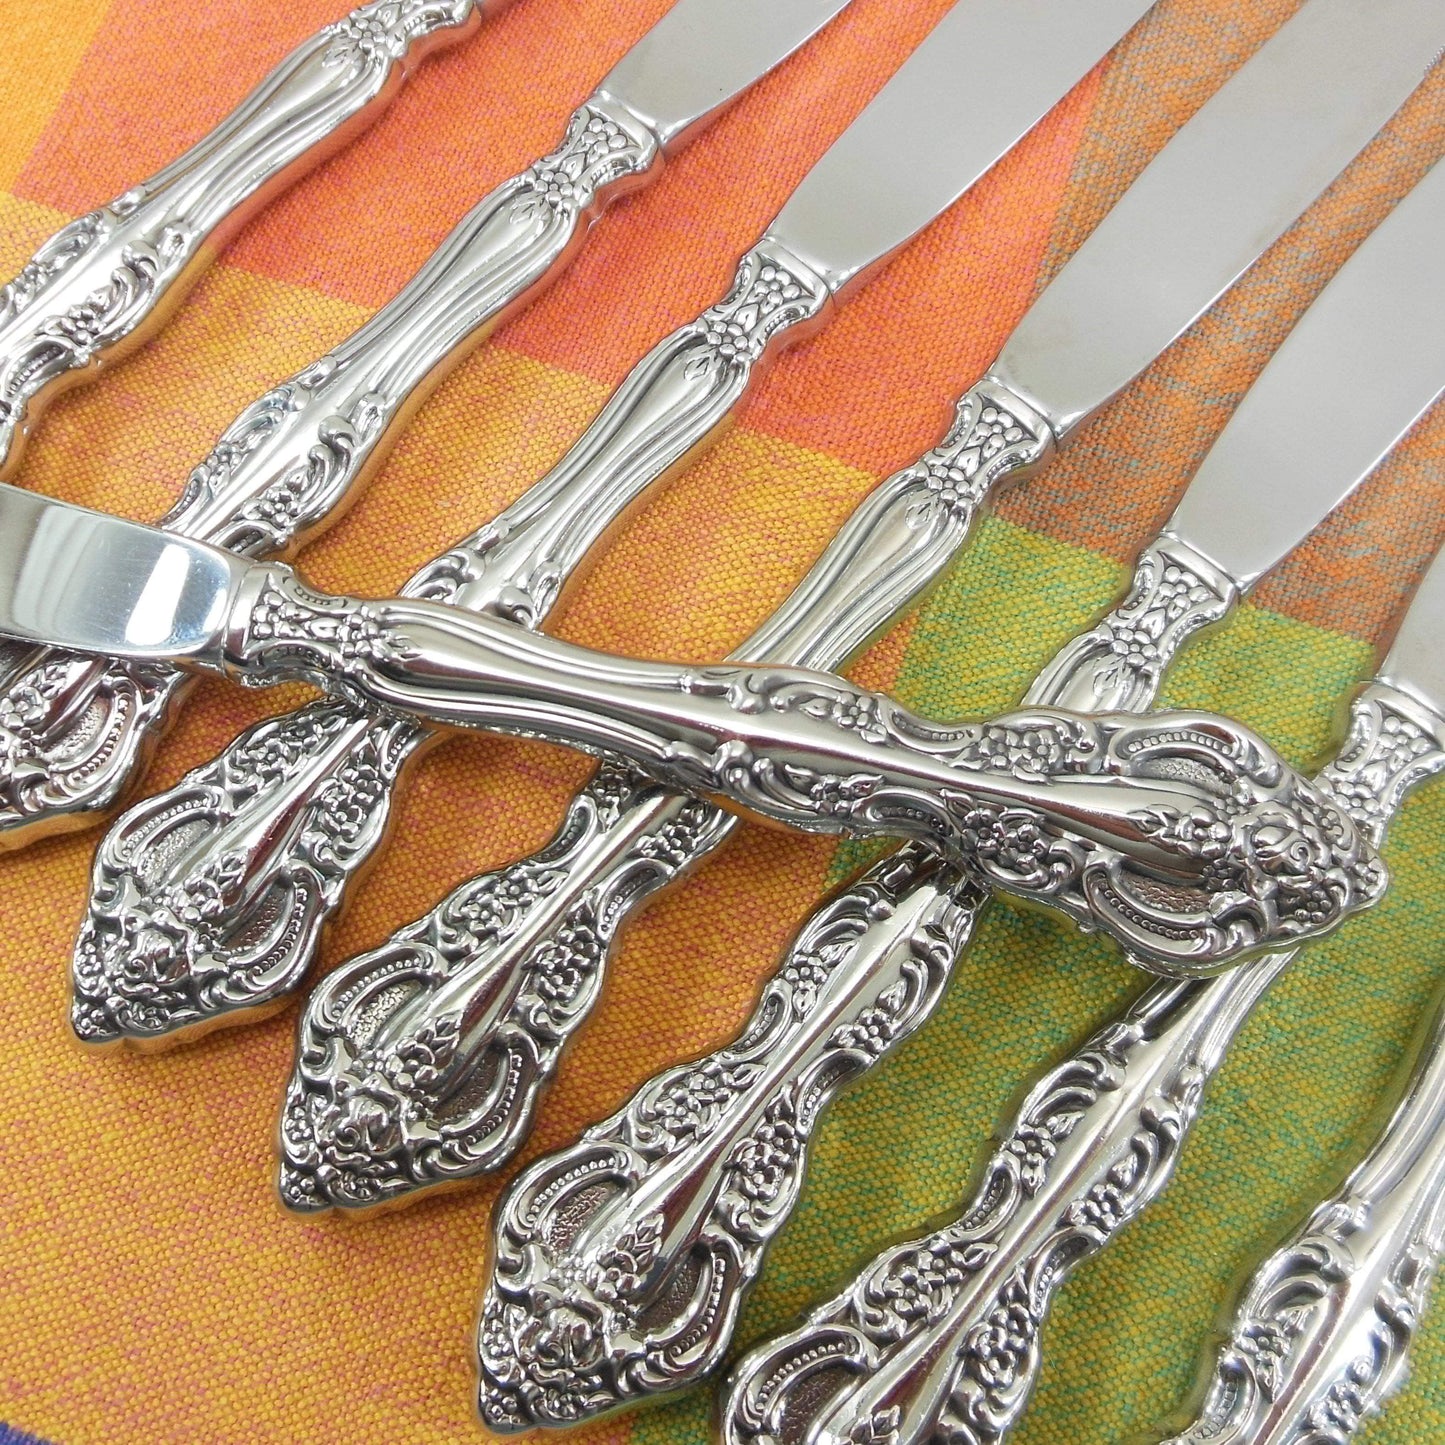 Oneida Cube Michelangelo Stainless 8 Set Hollow Dinner Knives Vintage Used